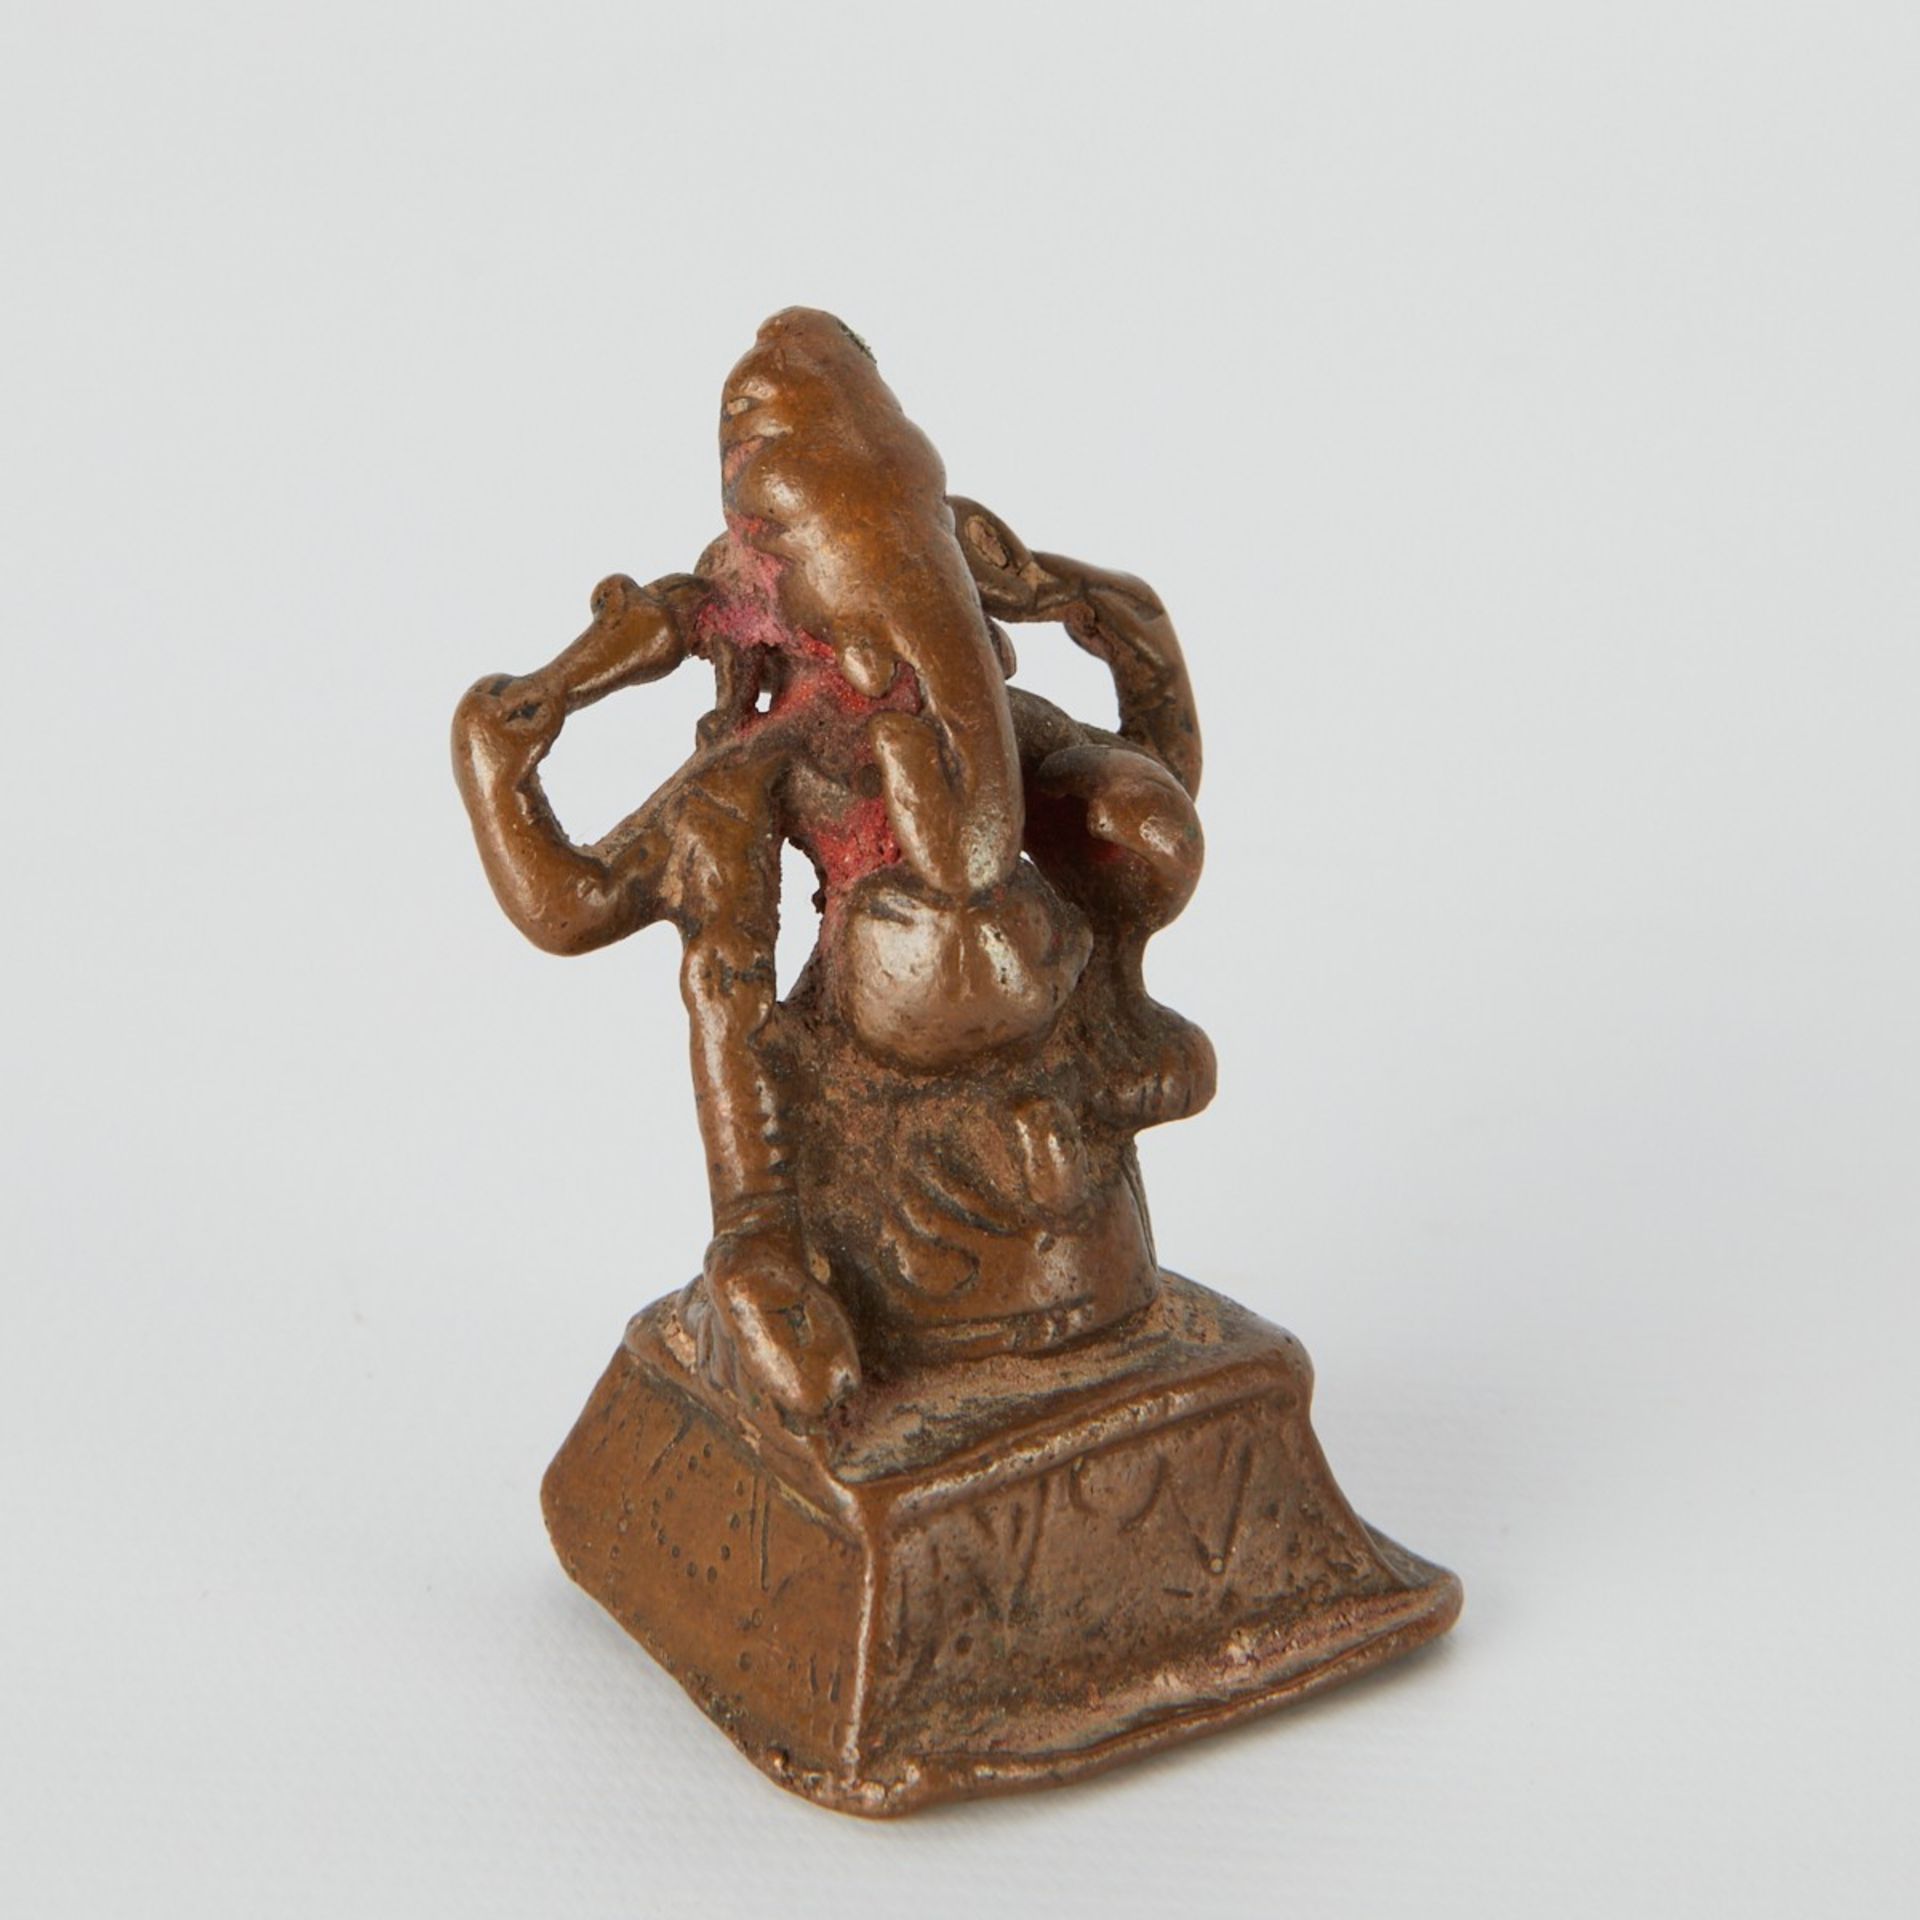 7 Early Indian/Chinese Bronzes Ganesh - Image 7 of 8